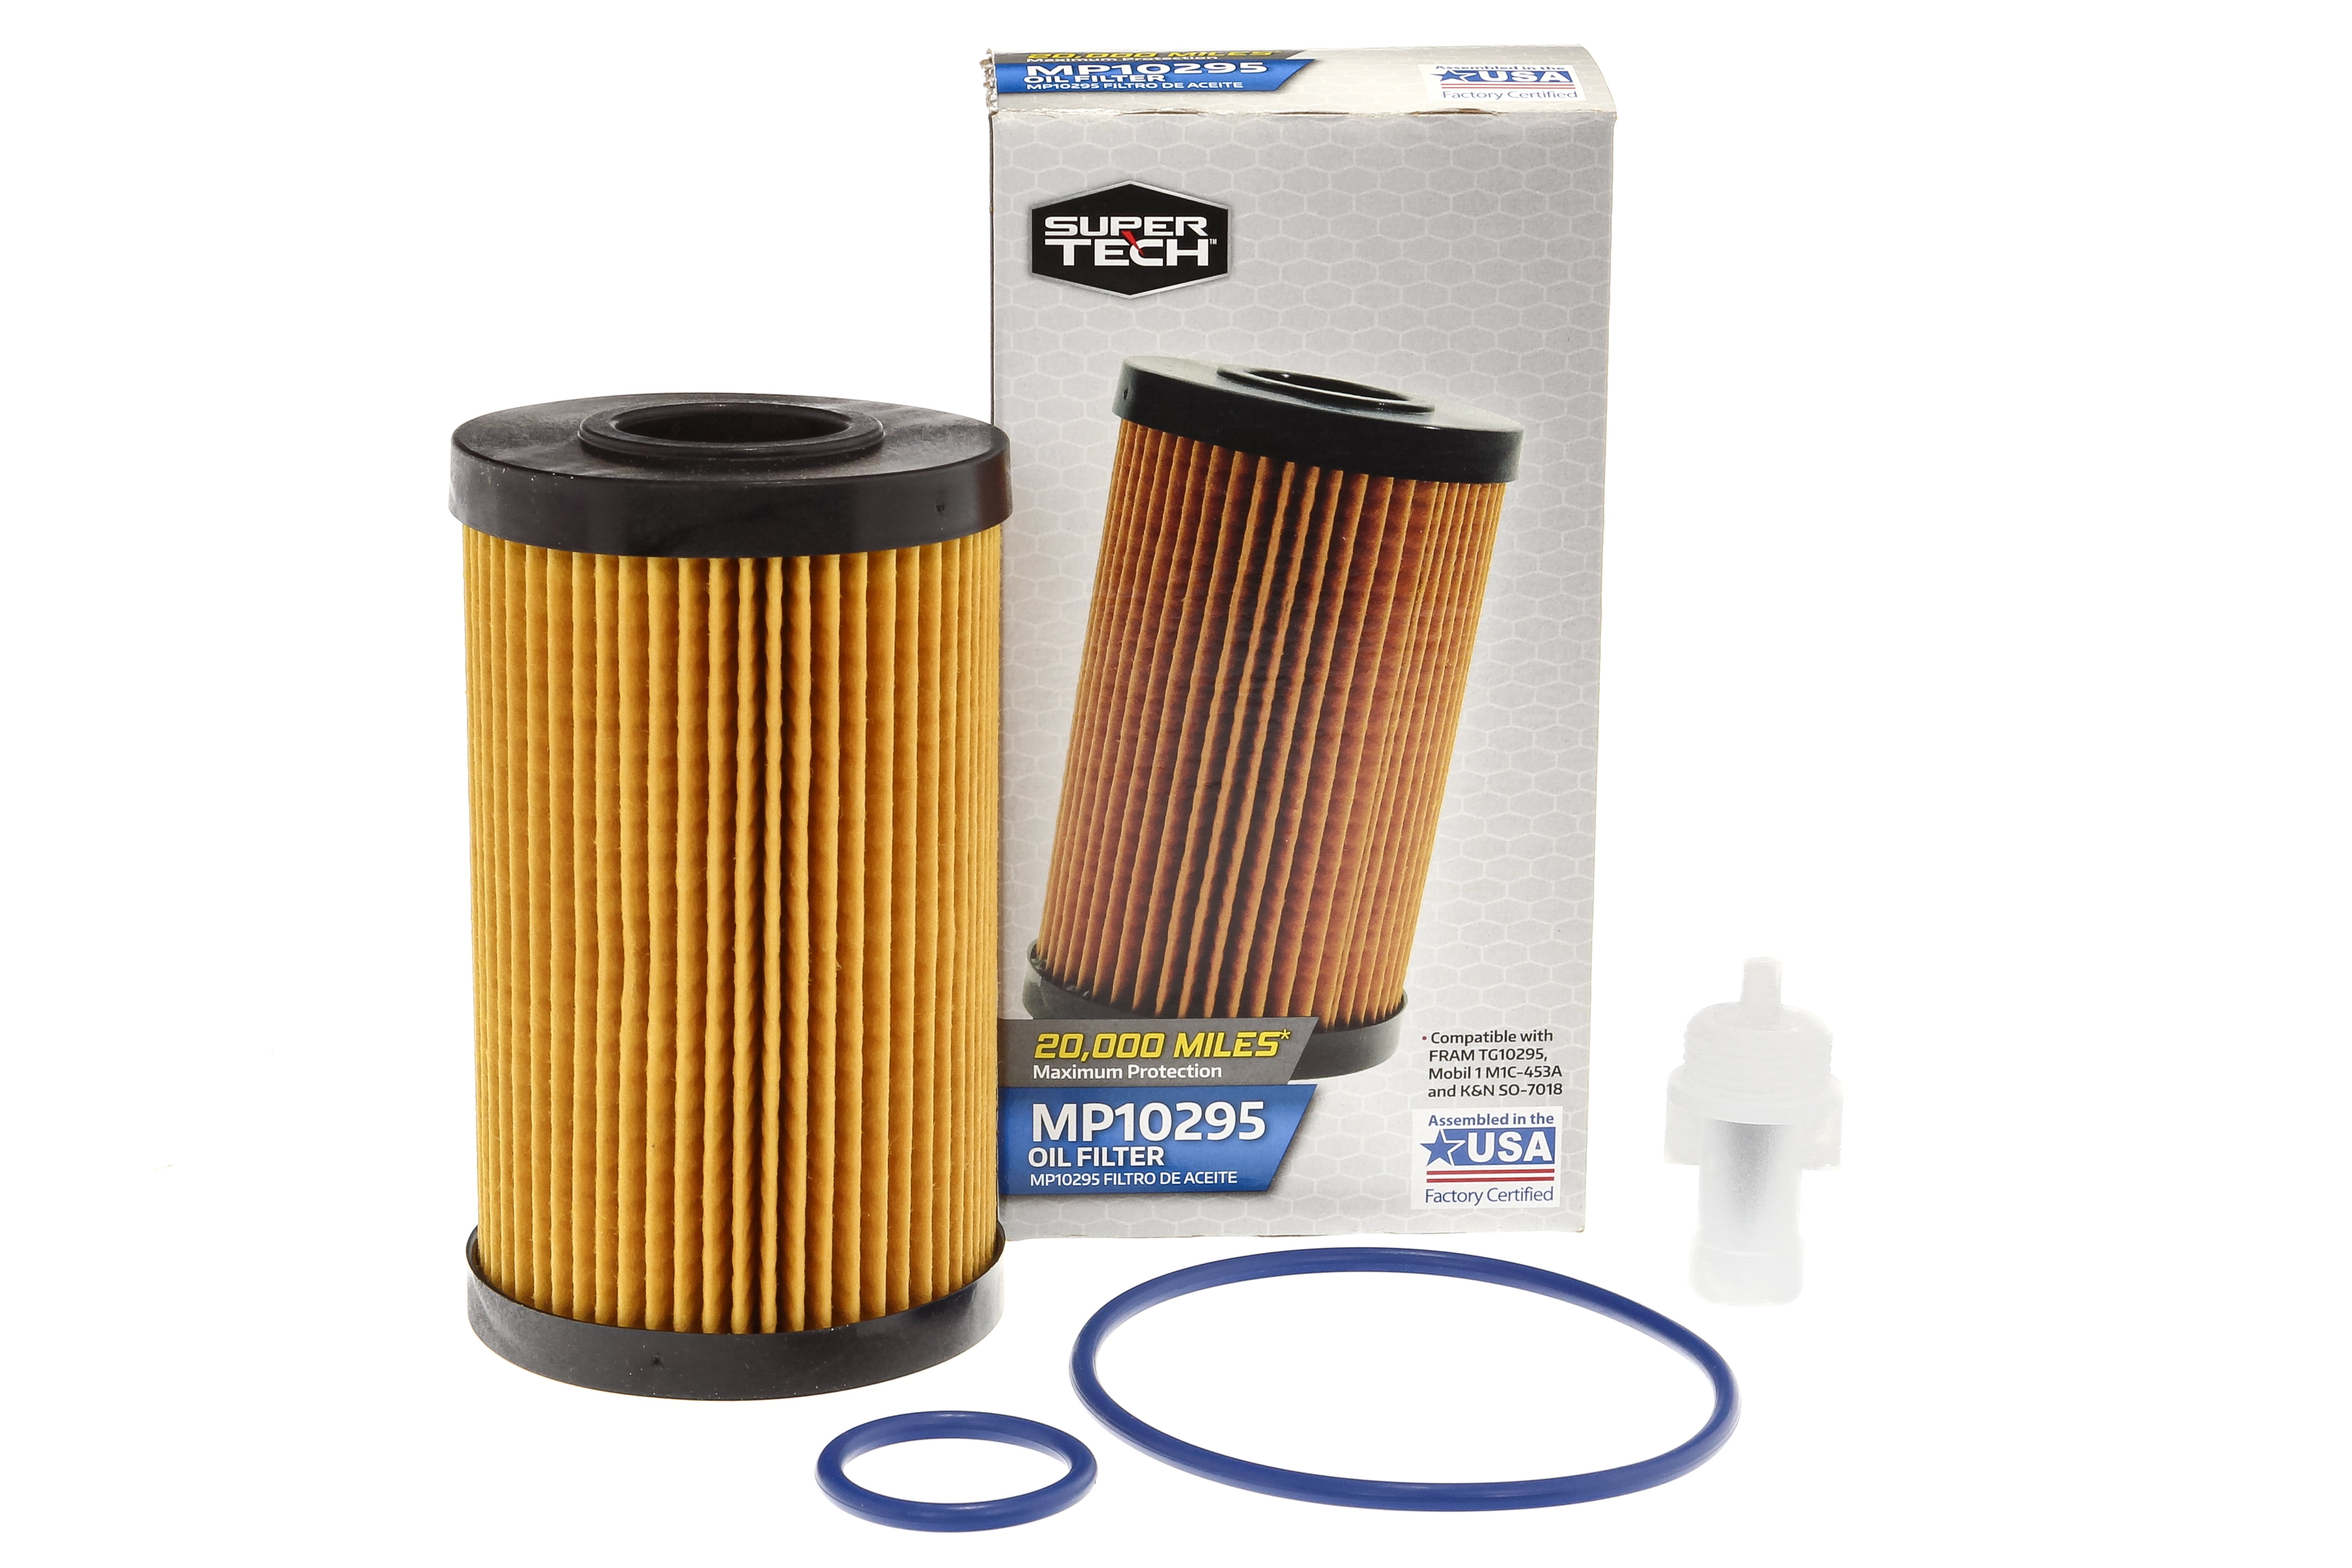 SuperTech Maximum Performance 20,000 mile Replacement Synthetic Oil Filter, MP10925, for Toyota and Lexus